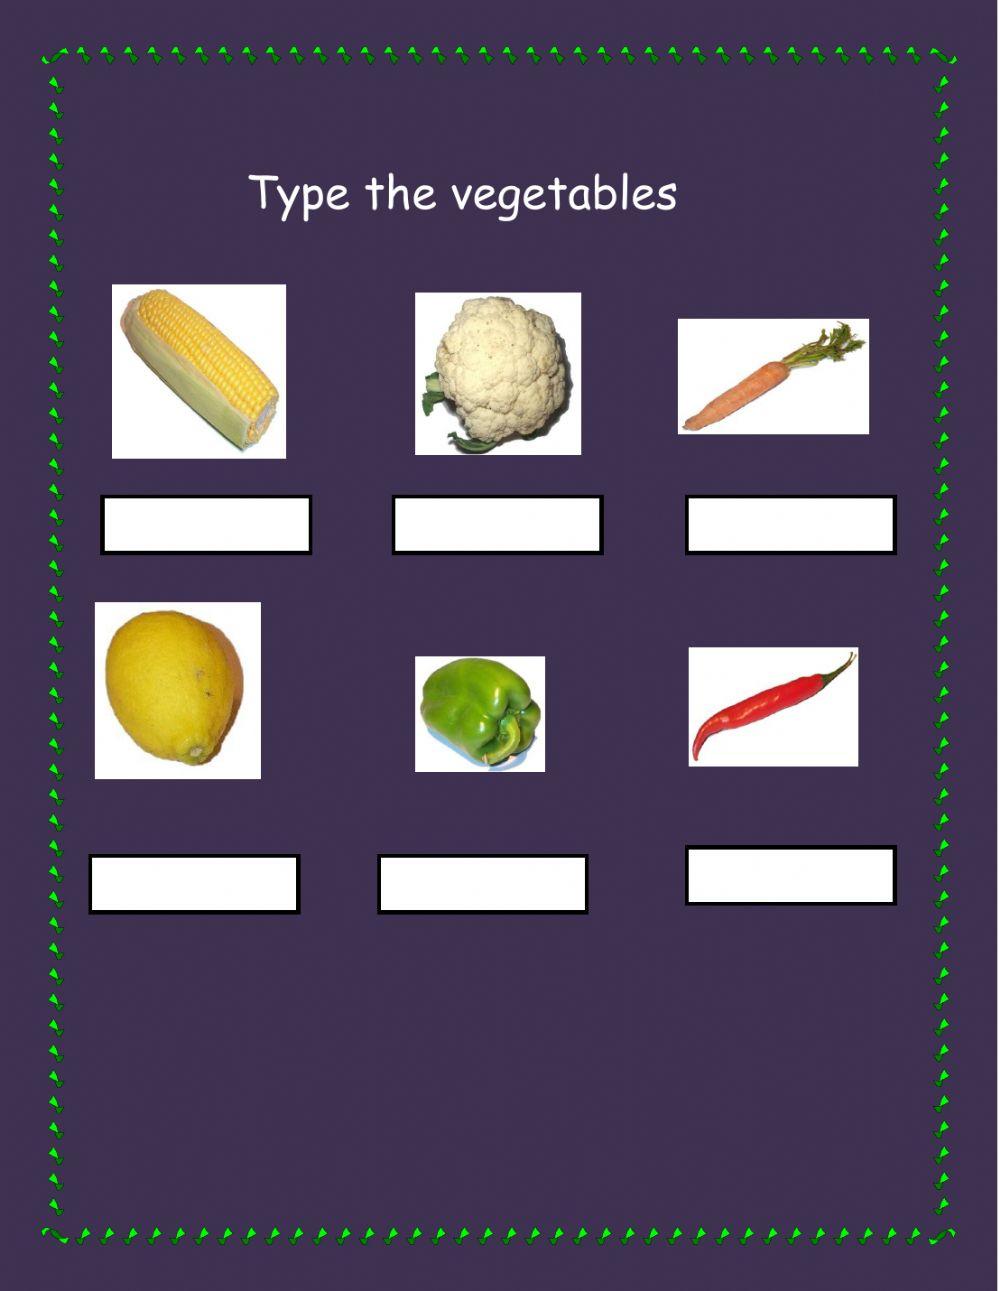 Type the vegetables